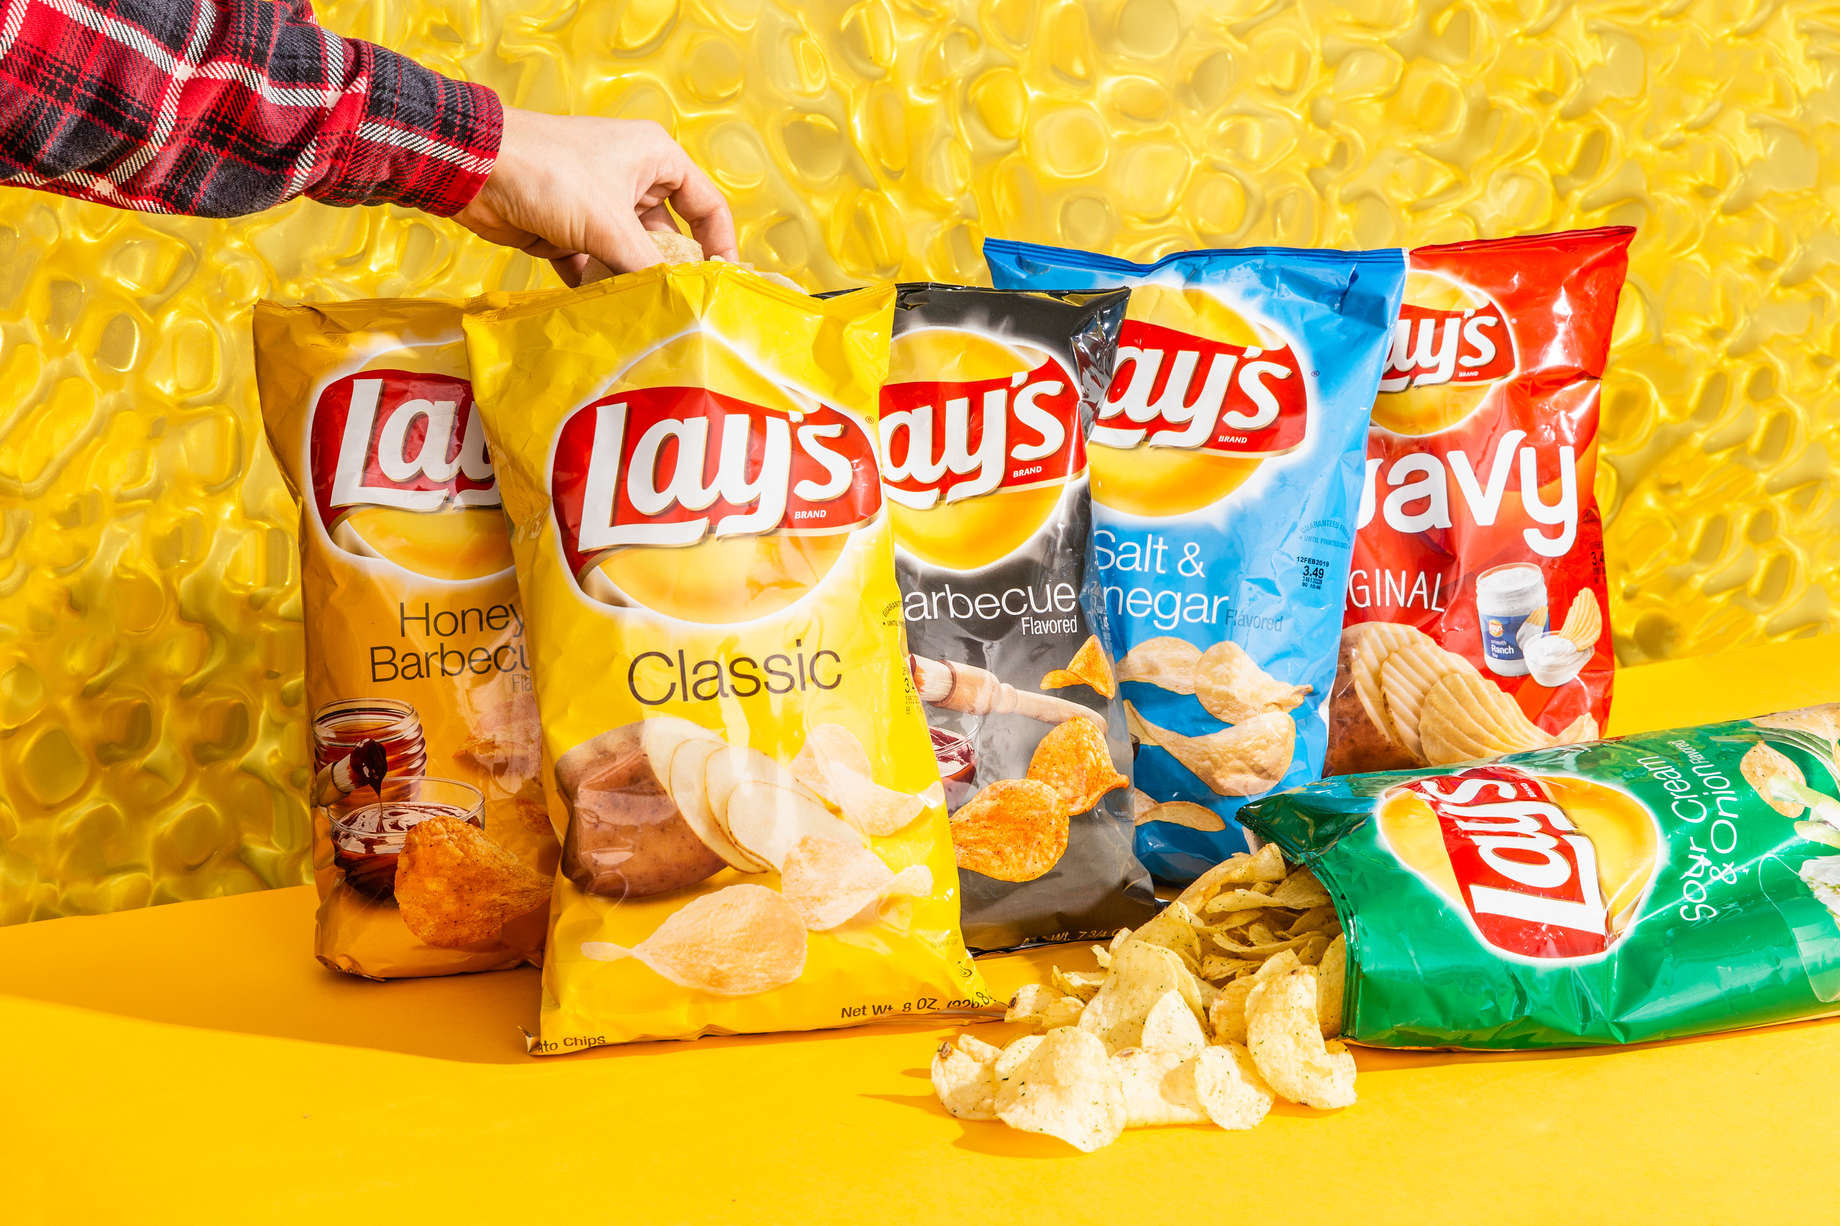 New World Cup Lay's Flavors Are Coming Sporked, 55% OFF